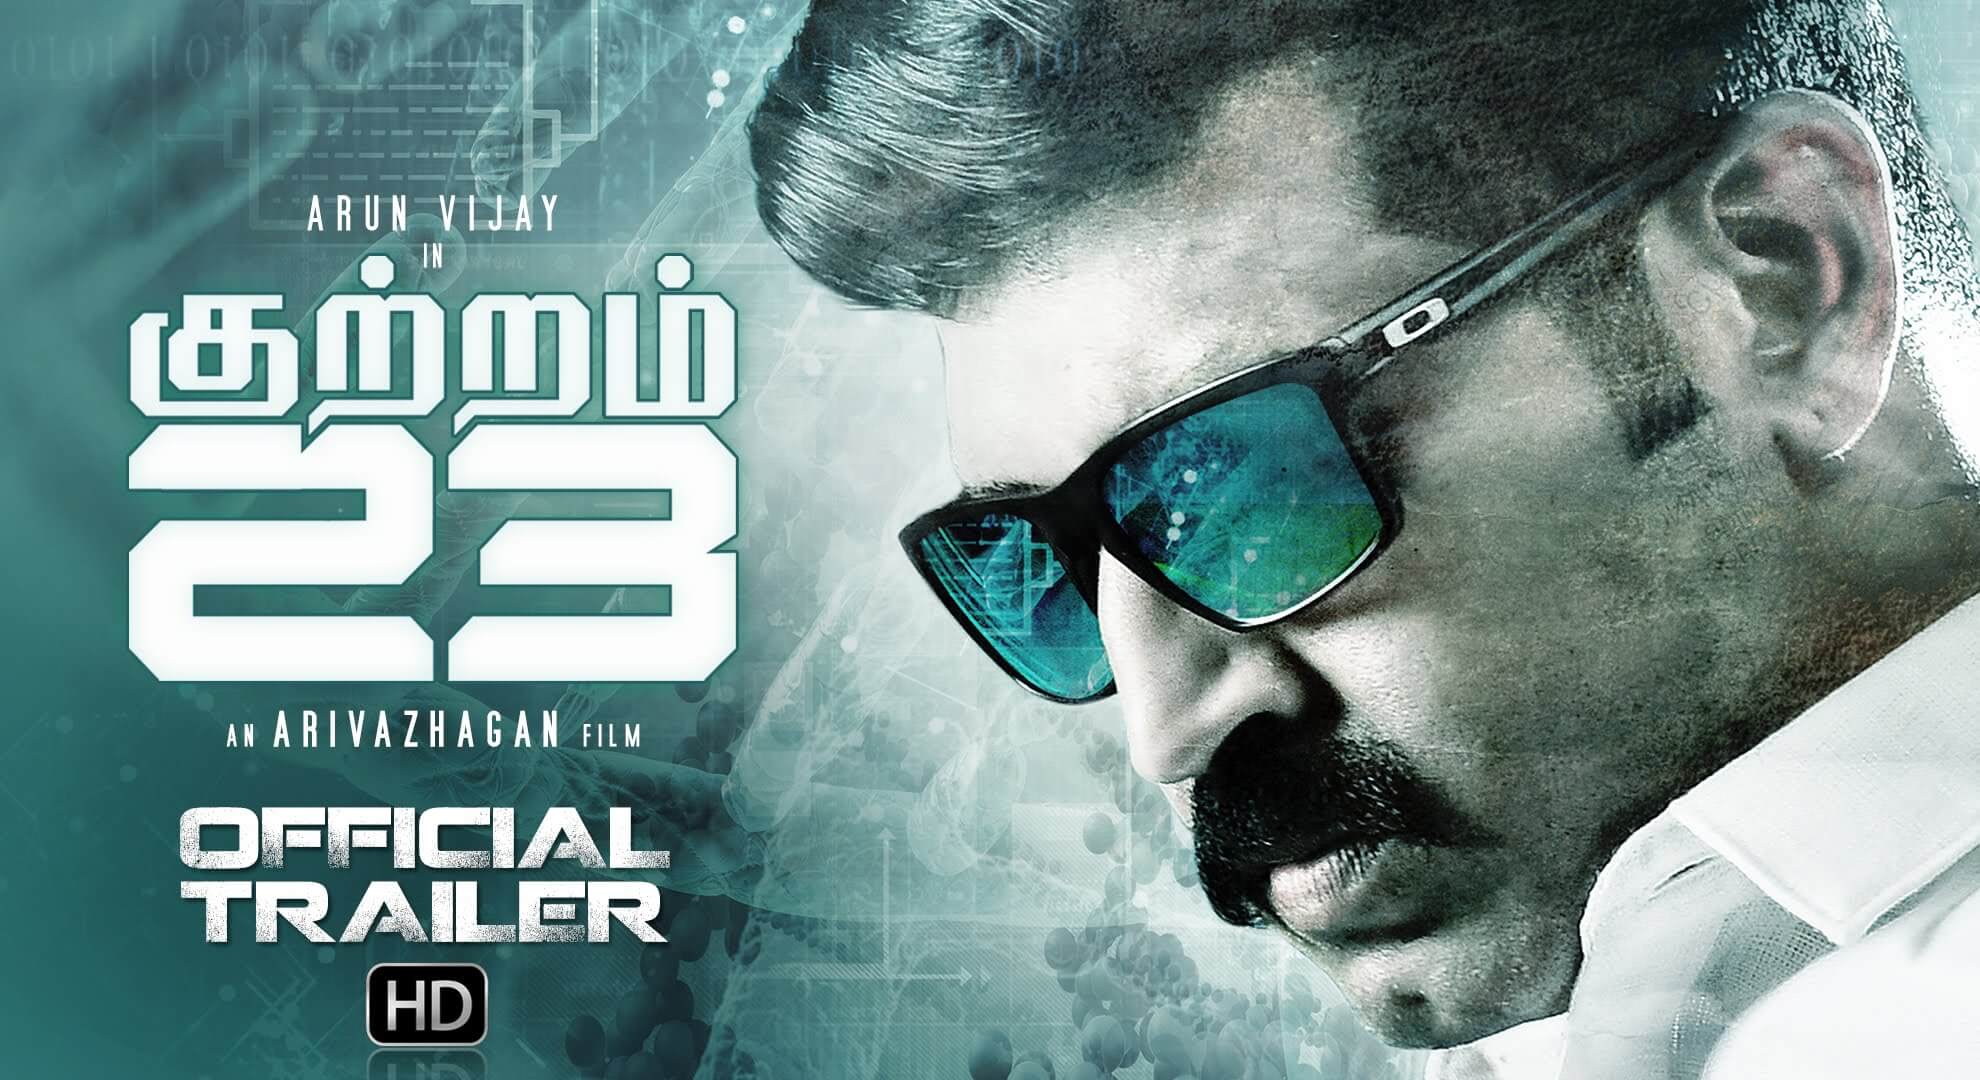 Kuttram 23 movie round-up : Talented actor Arun Vijay has come back after two years gap